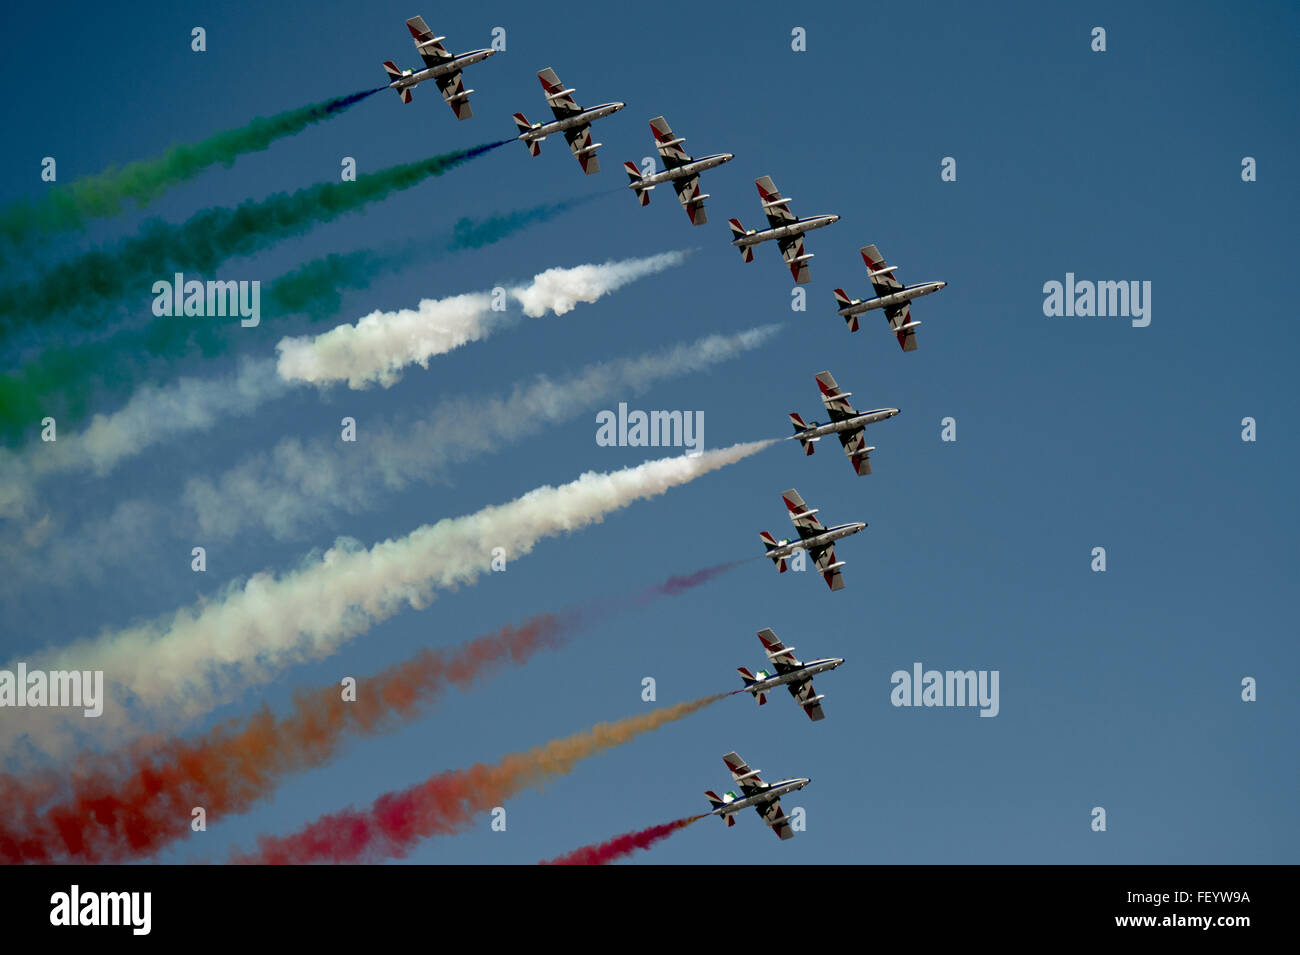 The Frecce Tricolori, the Italian Aeronatica Militare's aerobatic demonstration team, performs Nov. 10, 2015 at the 2015 Dubai Air Show, United Arab Emirates. The air show is a biennial event and is recognized as the premier aviation and air industry event in the Gulf and Middle East region and is one of the largest air shows in the world. ( Tech. Sgt. Nathan Lipscomb) Stock Photo